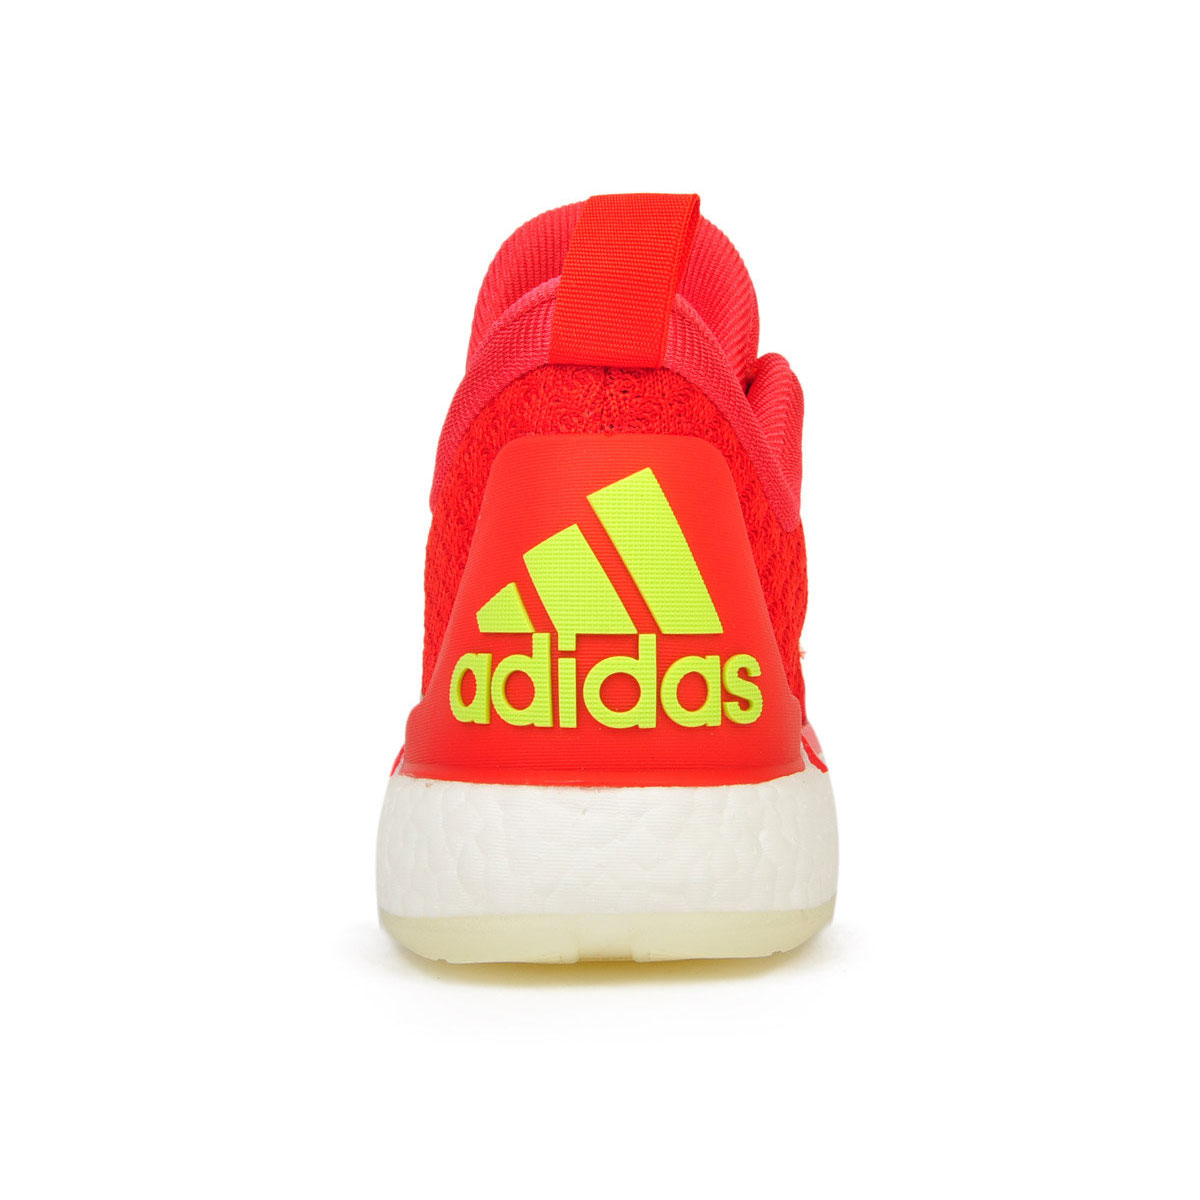 adidas Crazylight Boost 2.5 Low red  AQ7585